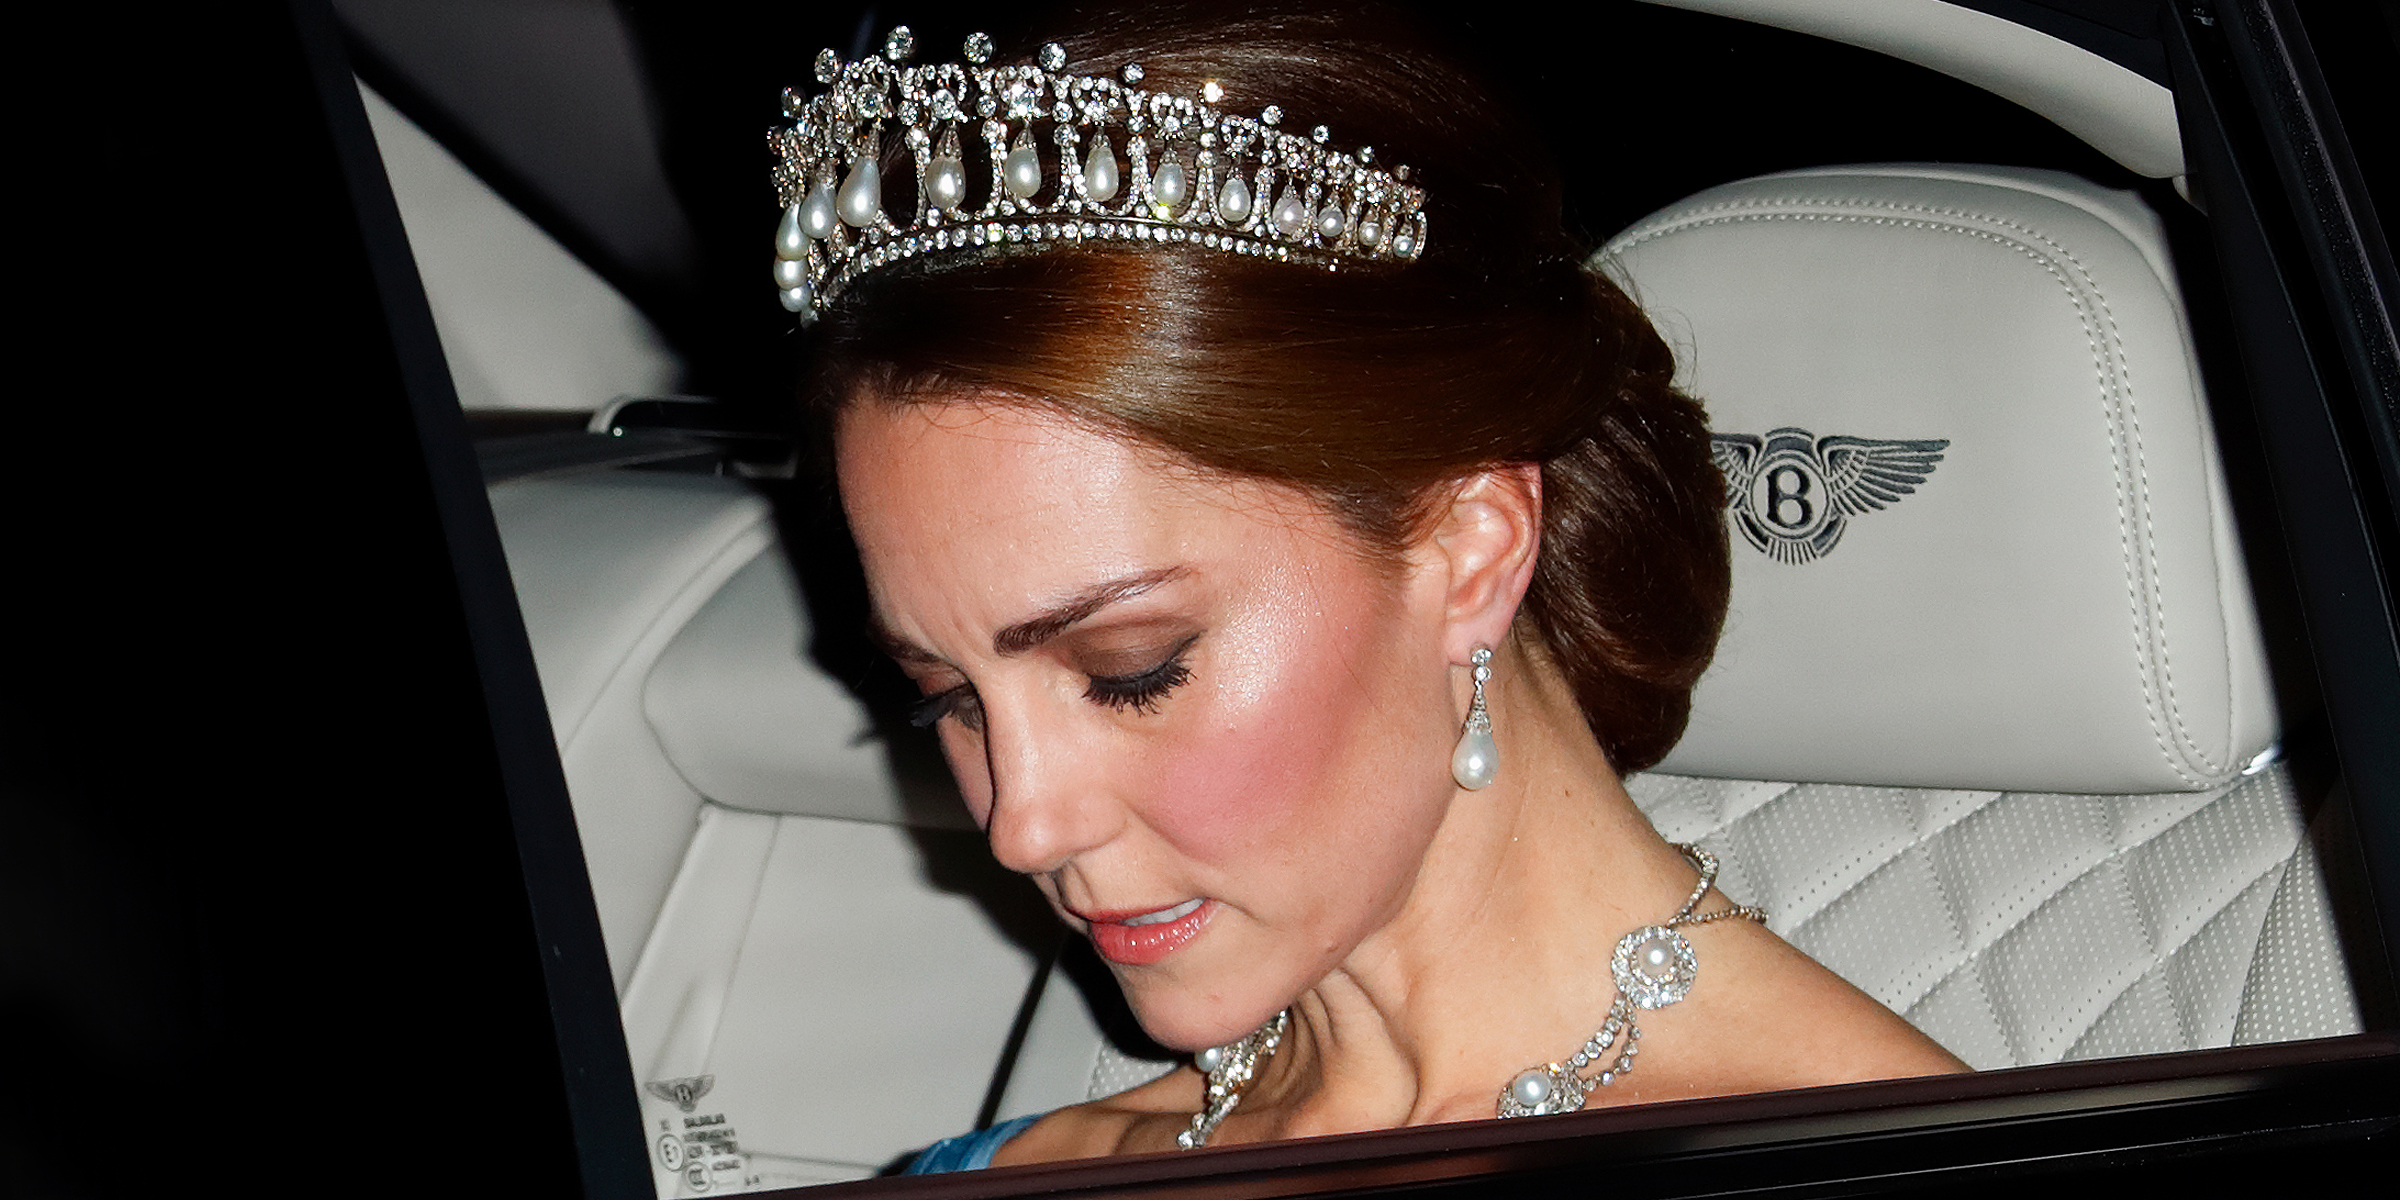 The Princess of Wales | Source: Getty Images